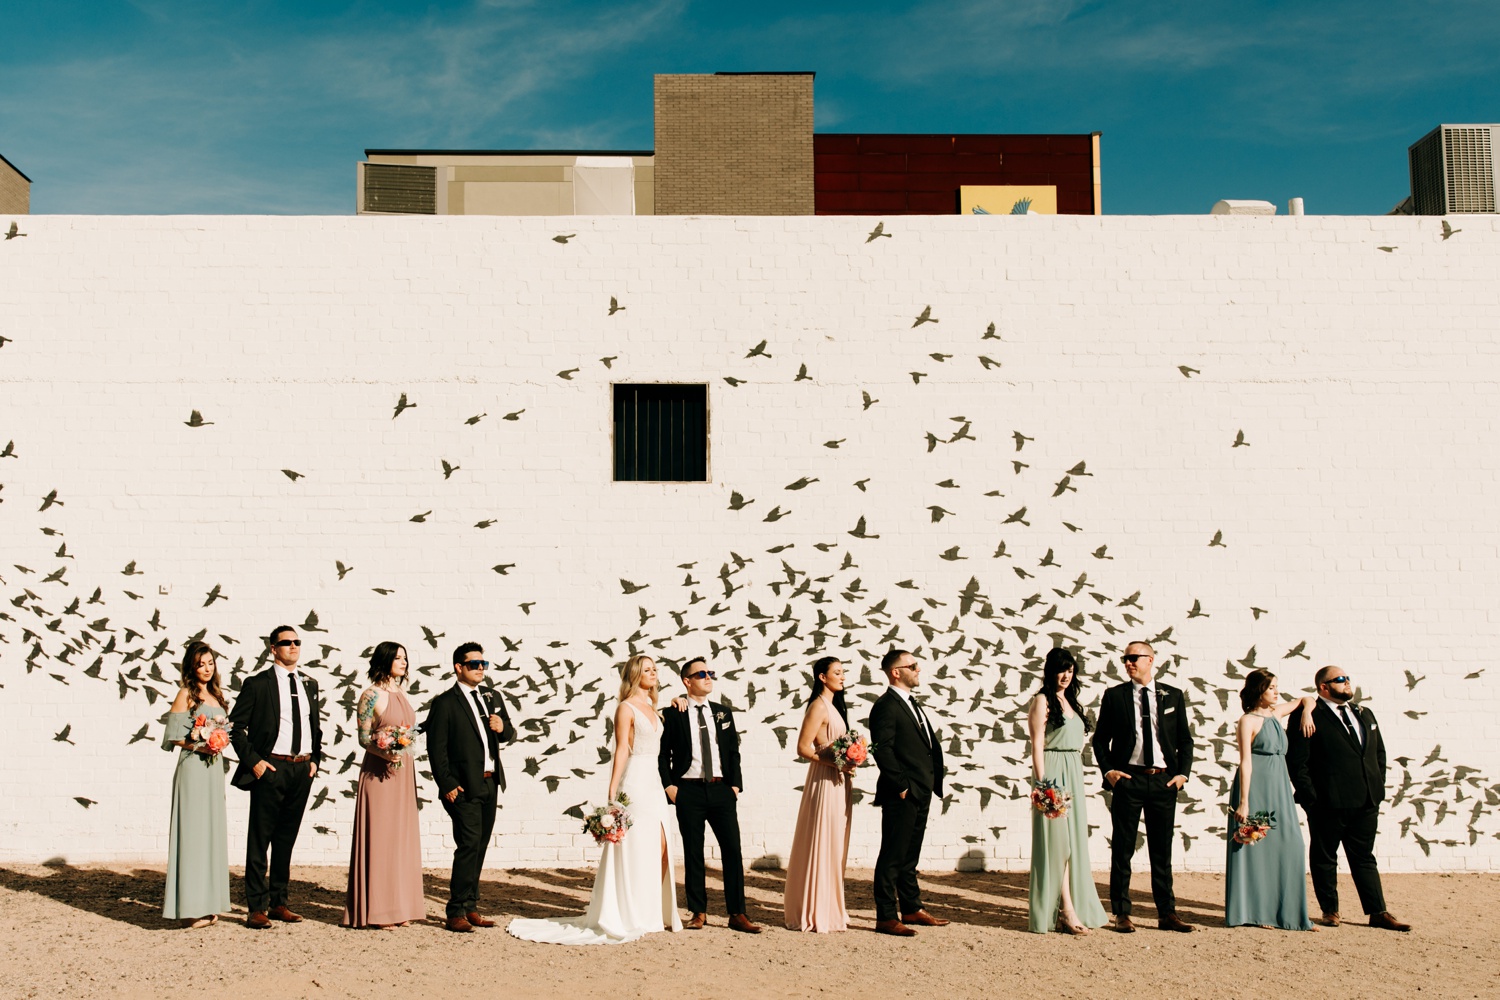 Wedding Party Photos in Downtown Phoenix with Graffiti Backdrop